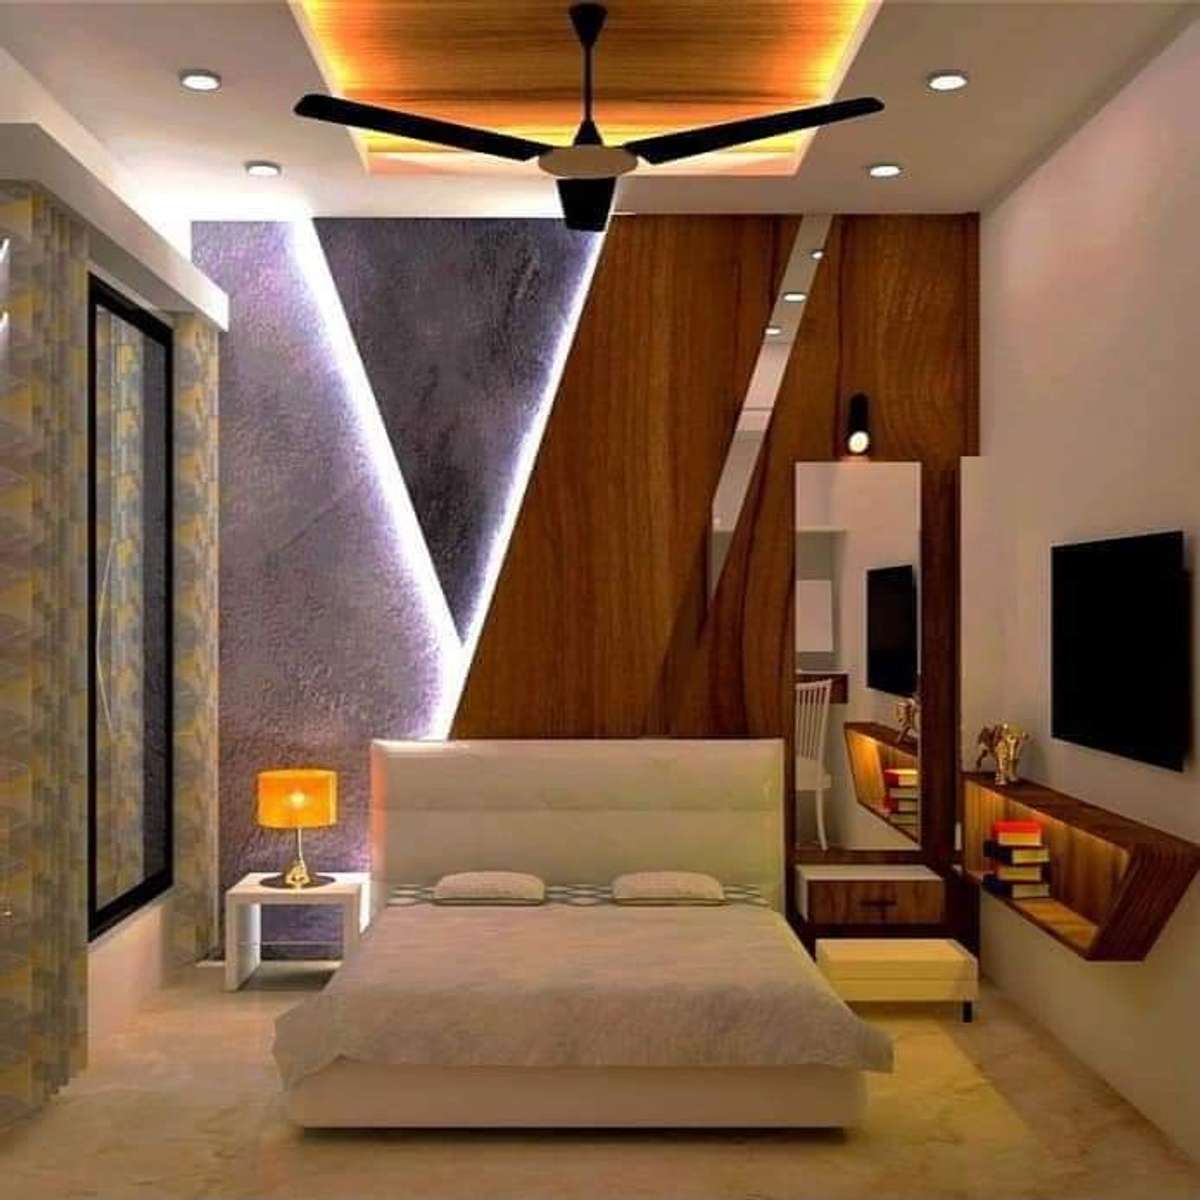 Find here the best home interiors and get design your Entire Home Including your ✓Livingroom ✓Bedroom ✓Kitchen ✓Bathroom and everything.
.
.
.
contact us  9953725277
Email I'd: info@cultureinterior.in
Website: www.cultureinterior.in

Please do like ,share & subscribe our you tube channel https://youtube.com/channel/UC9Hm9090aOlJOcszdAb6-PQ

https://www.linkedin.com/in/rohit-rastogi-396361121

https://www.instagram.com/invites/contact/?i=6a8m1qm9qfdc&utm_content=j43si22

https://twitter.com/CultureInterio4?t=1RUlTjWZOaOTFeSL57kaxw&s=09
.
.
.
#interiors #interiordesign #interior #design #homedecor #decor #architecture #home #interiordesigner #homedesign #interiorstyling #furniture #interiordecor #decoration #art #luxury #designer #inspiration #interiordecorating #style #homesweethome #livingroom #interiorinspo #furnituredesign #handmade #homestyle #interiorstyle #interiorinspirations